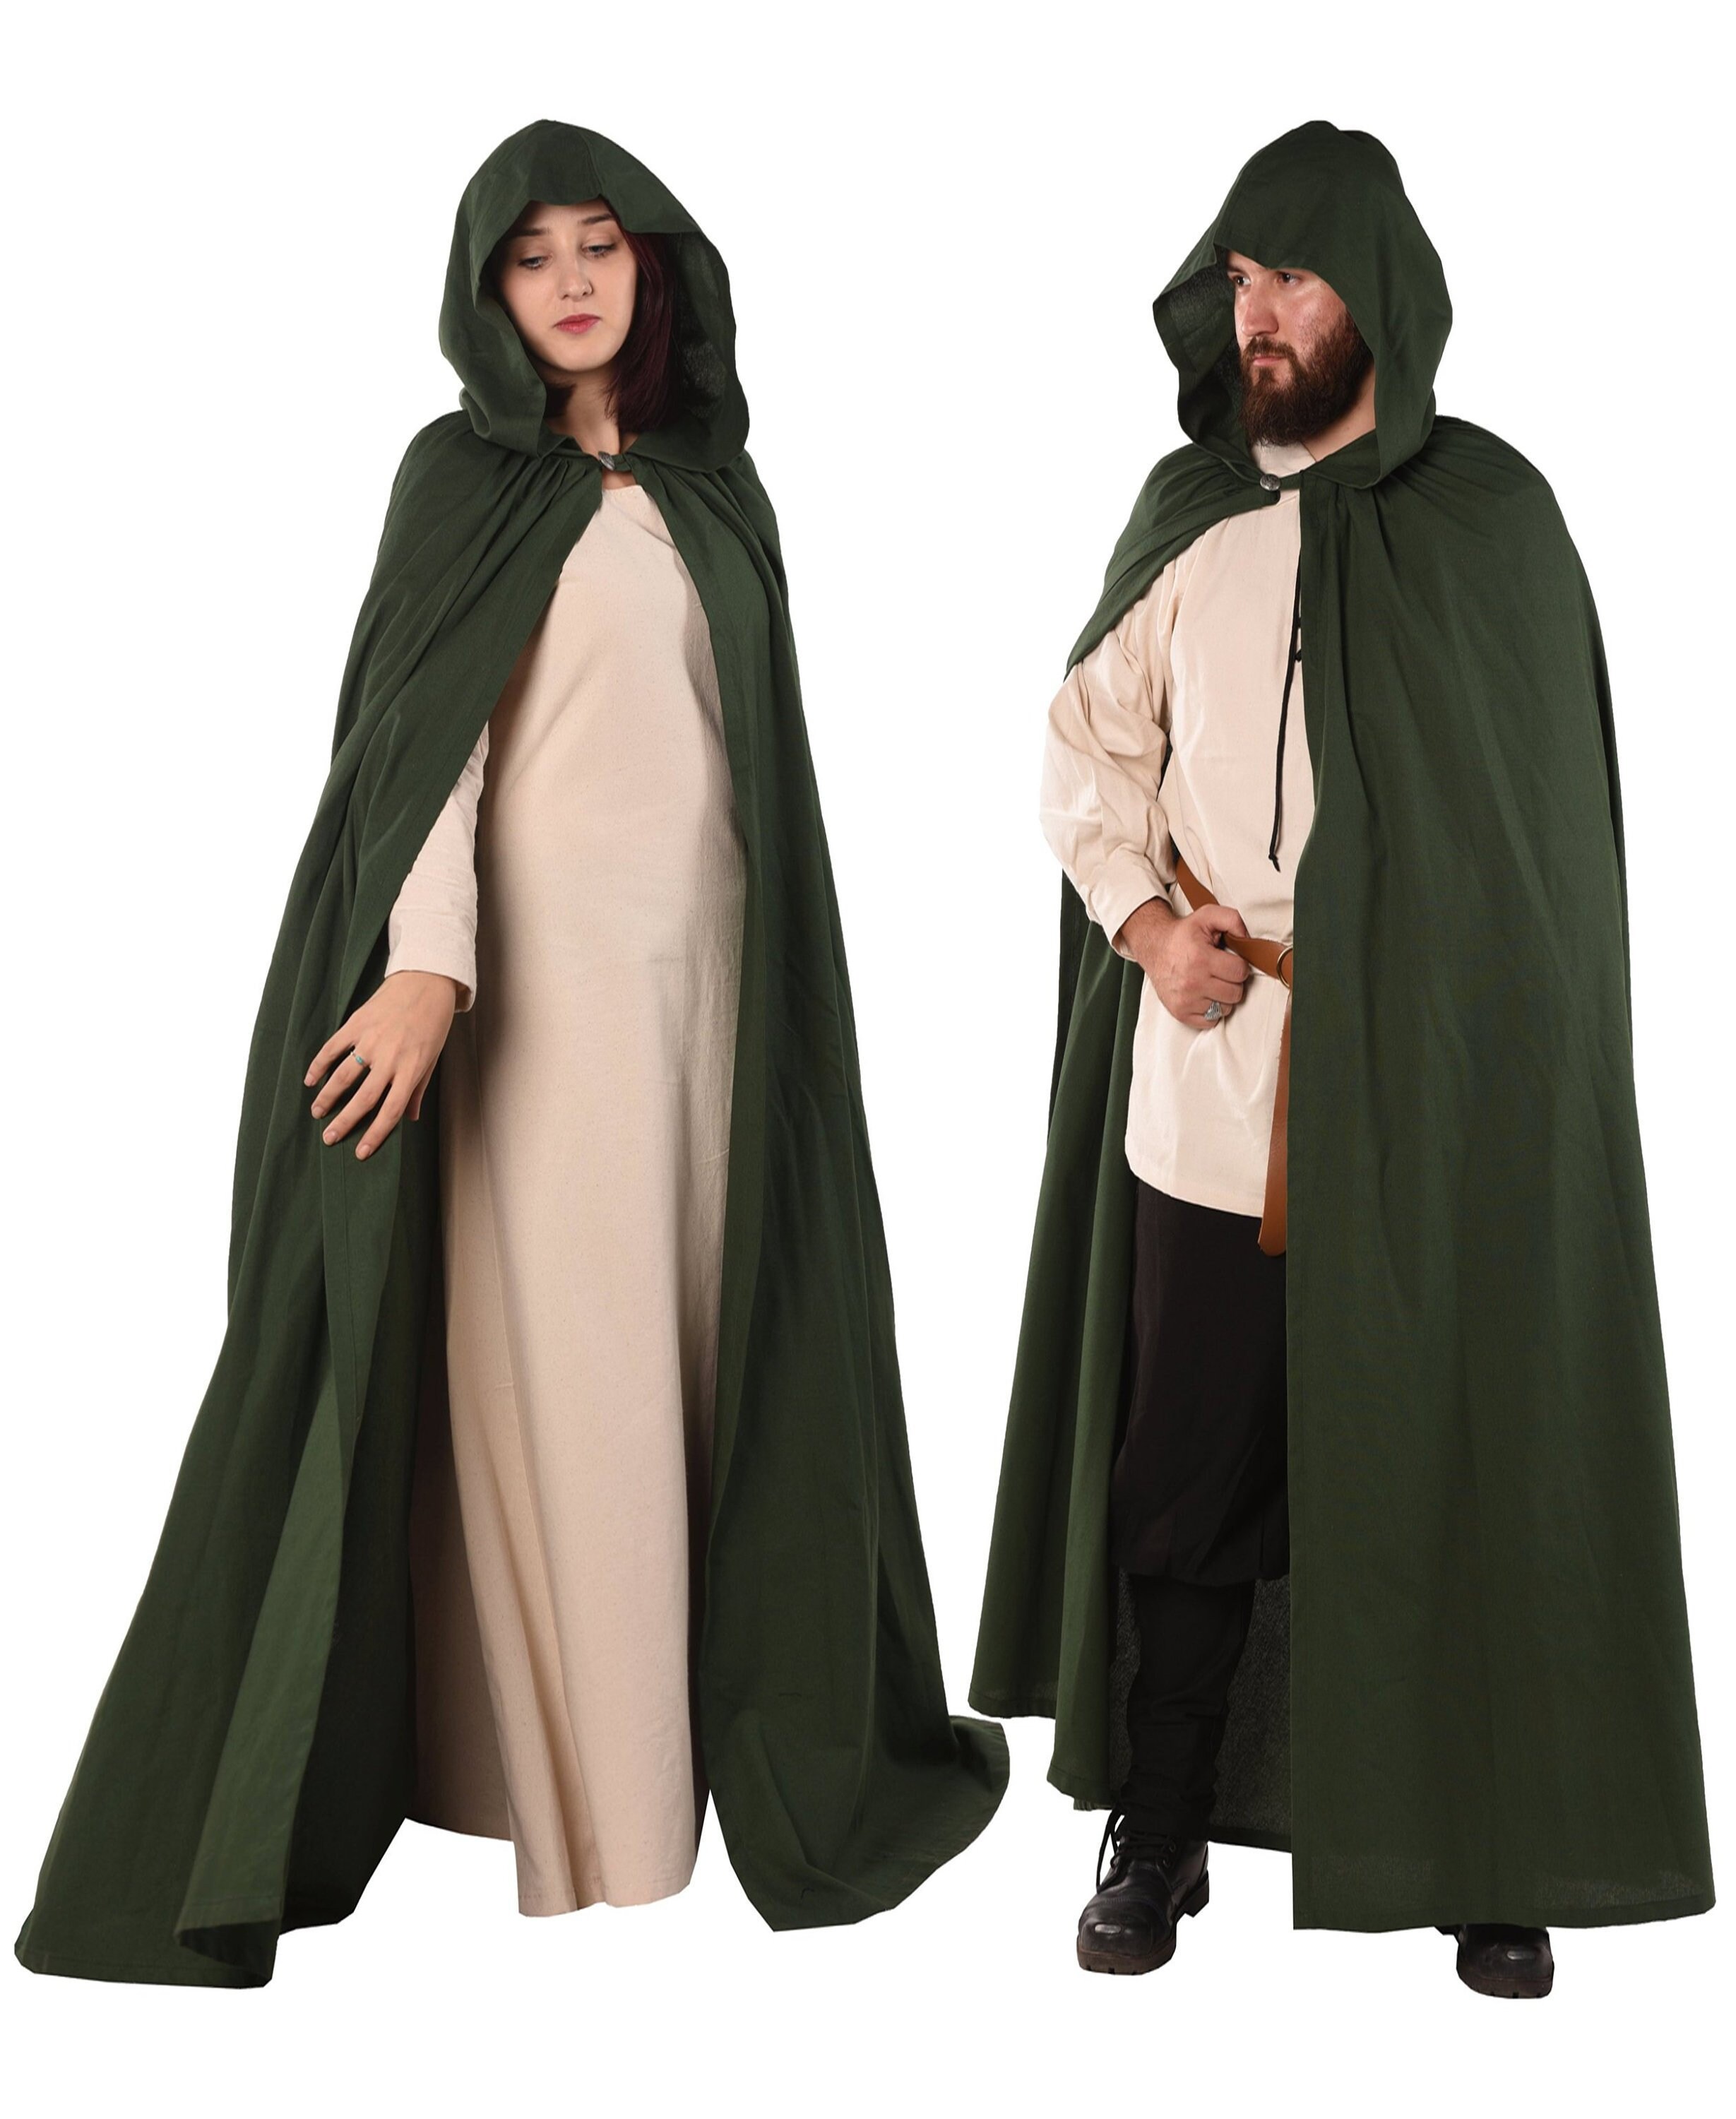 HERO Cotton Medieval Viking Renaissance Hooded COTTON CANVAS Cloak Made in  Turkey by Bycalvina.com 